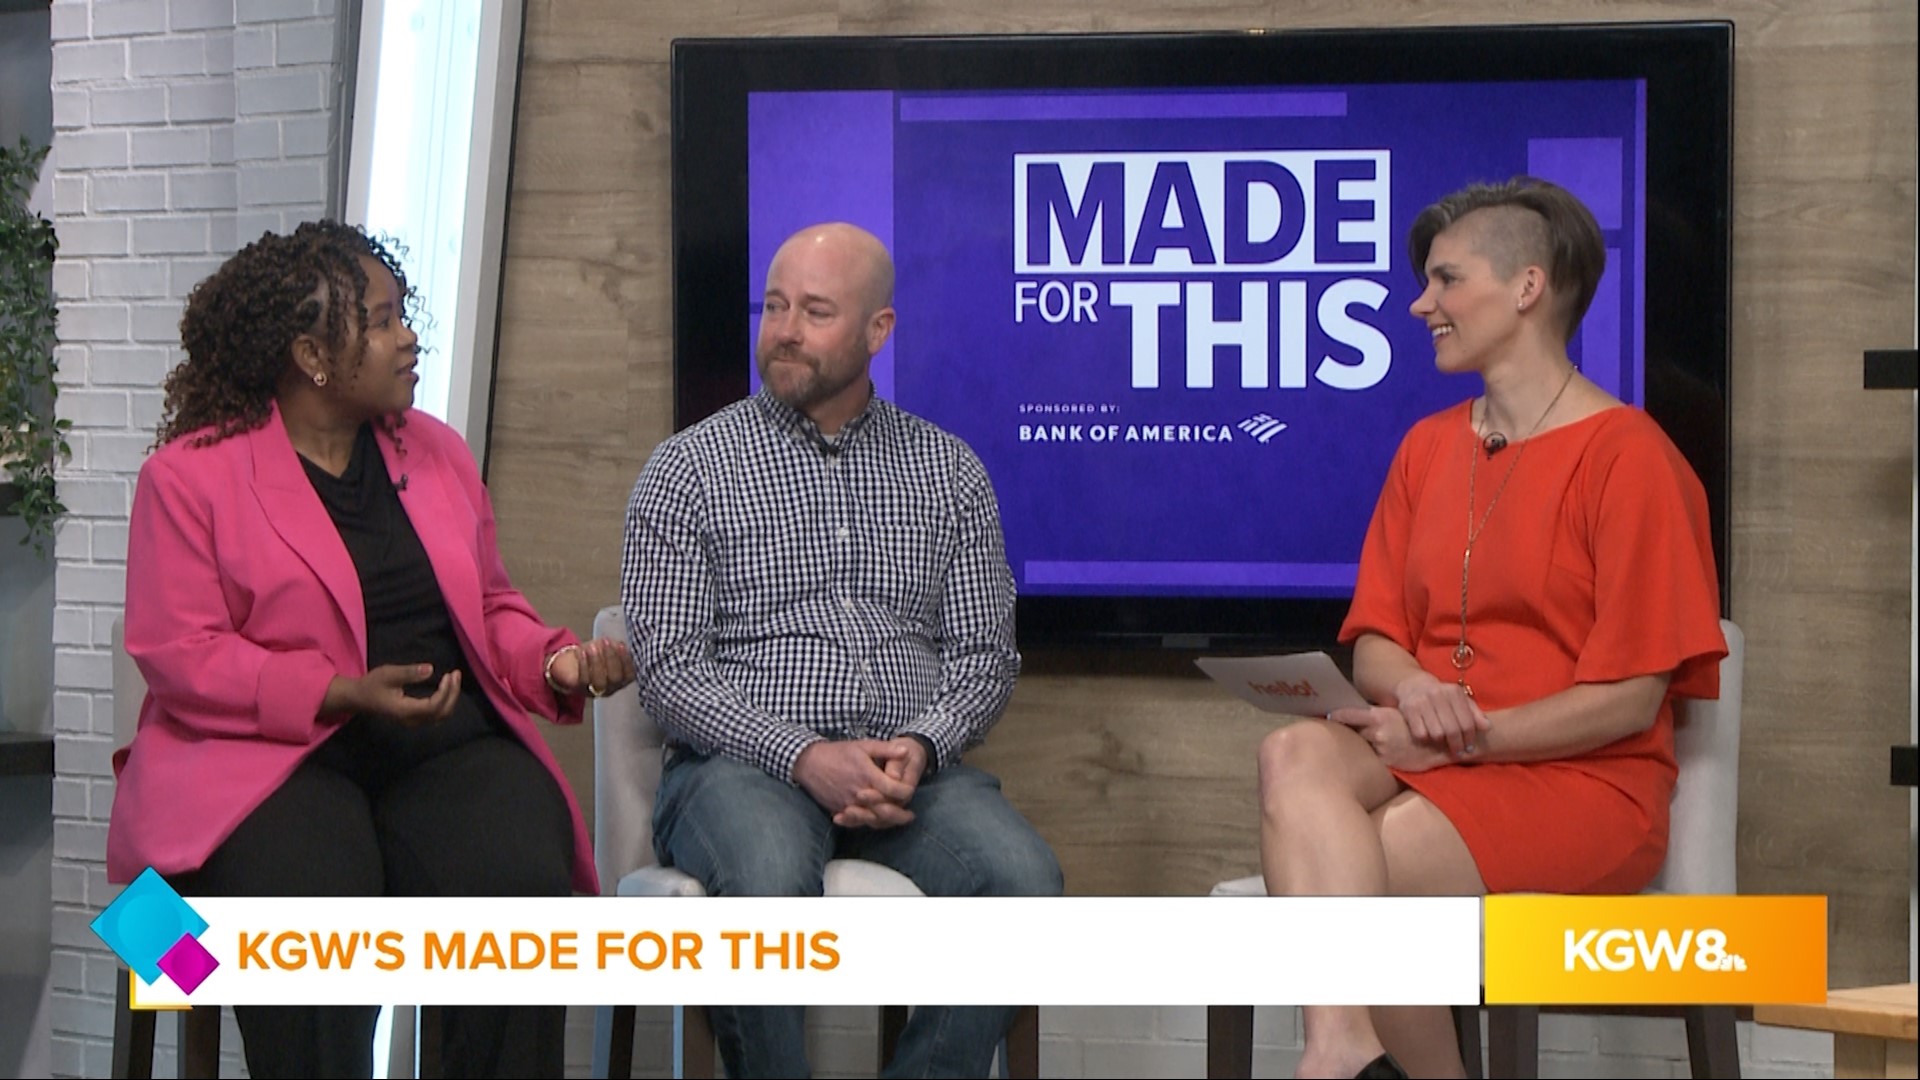 KGW's "Made for This" initiative helps connect people to jobs that don't require a traditional education.